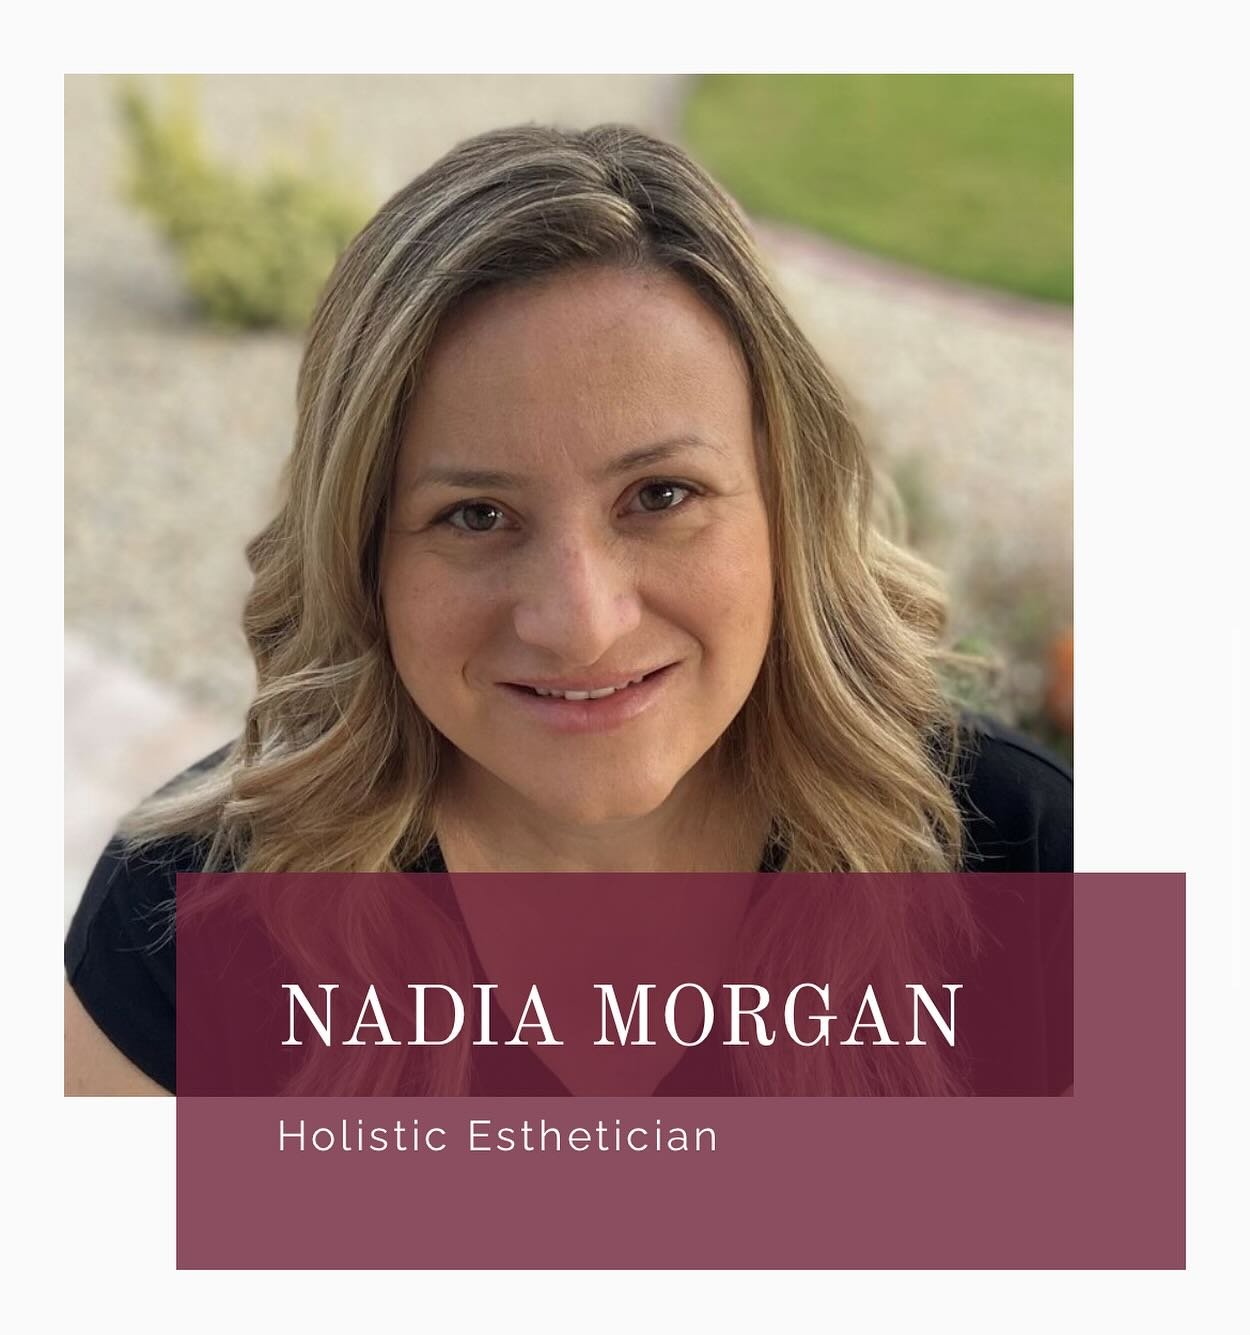 Meet Nadia! We are lucky to have her ❤️

Welcome to Heart Space Holistic Skin. As a holistic esthetician, my priority is treating your skin with plant-medicine skincare and nervous system regulation. With a background in yoga, fascial stretch, and so